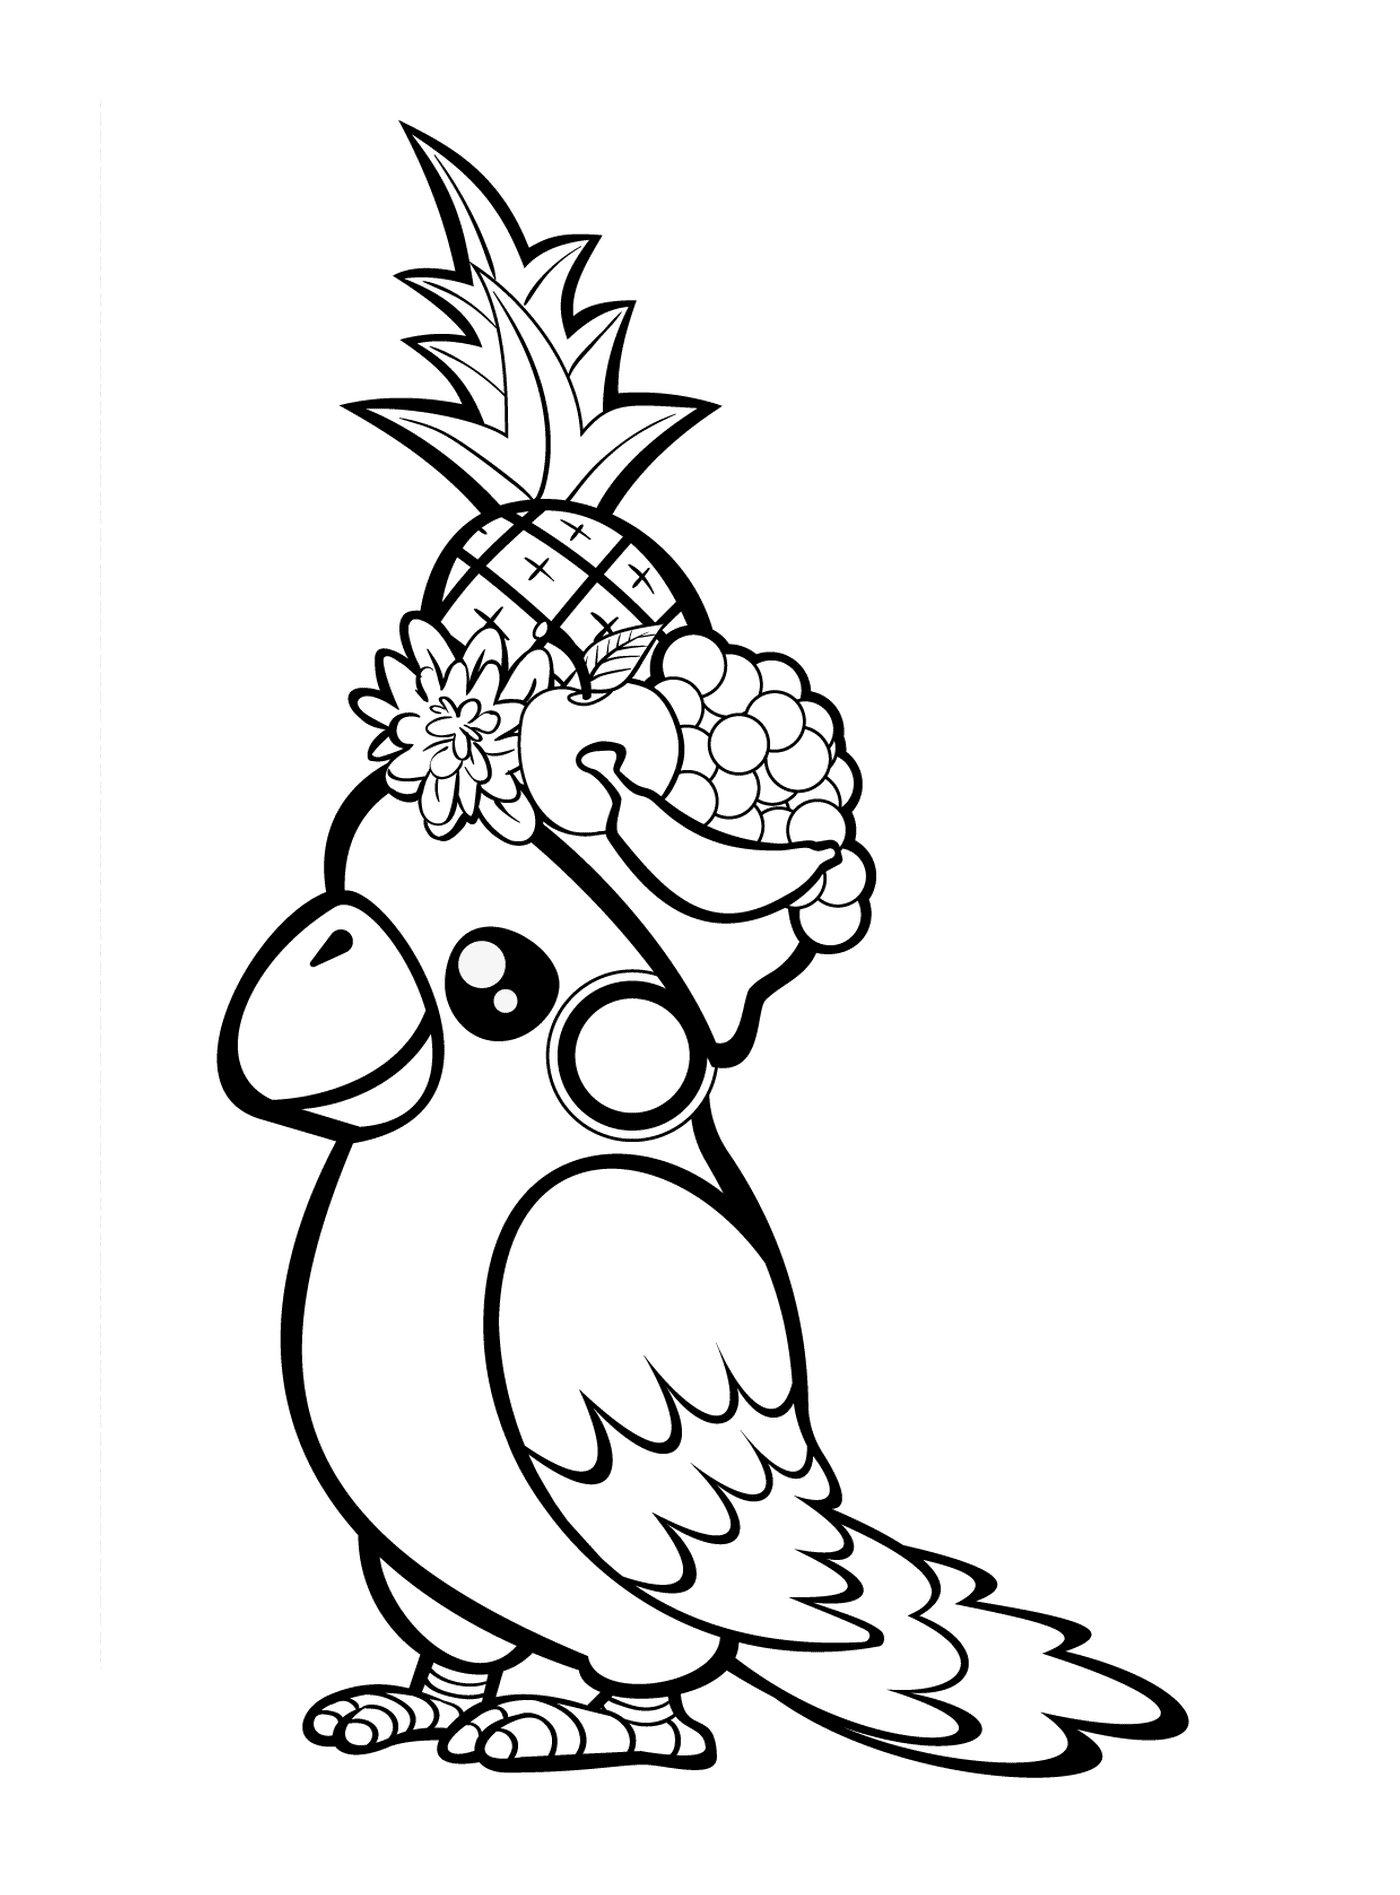  A parrot holding a pineapple 